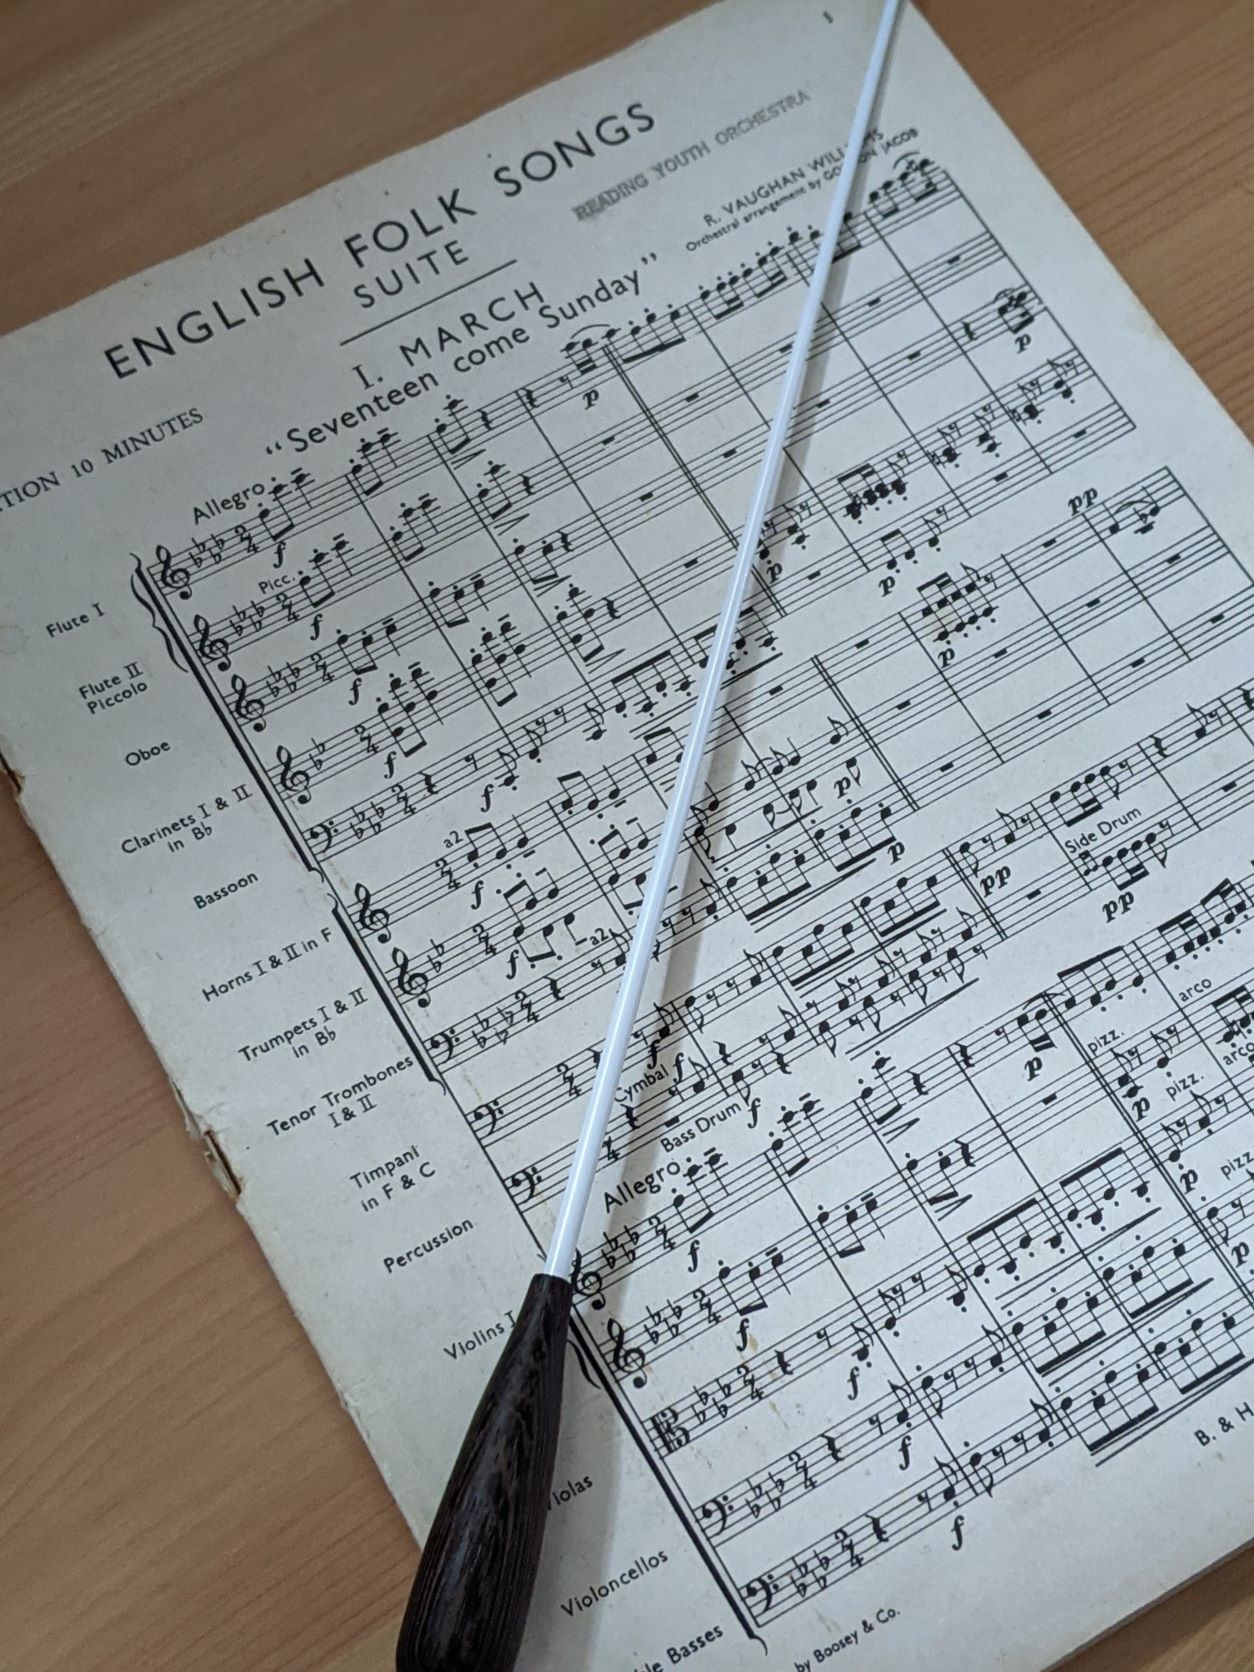 Front page of English Folk Songs Suite score, by Vaughan Williams, with a conductor's baton